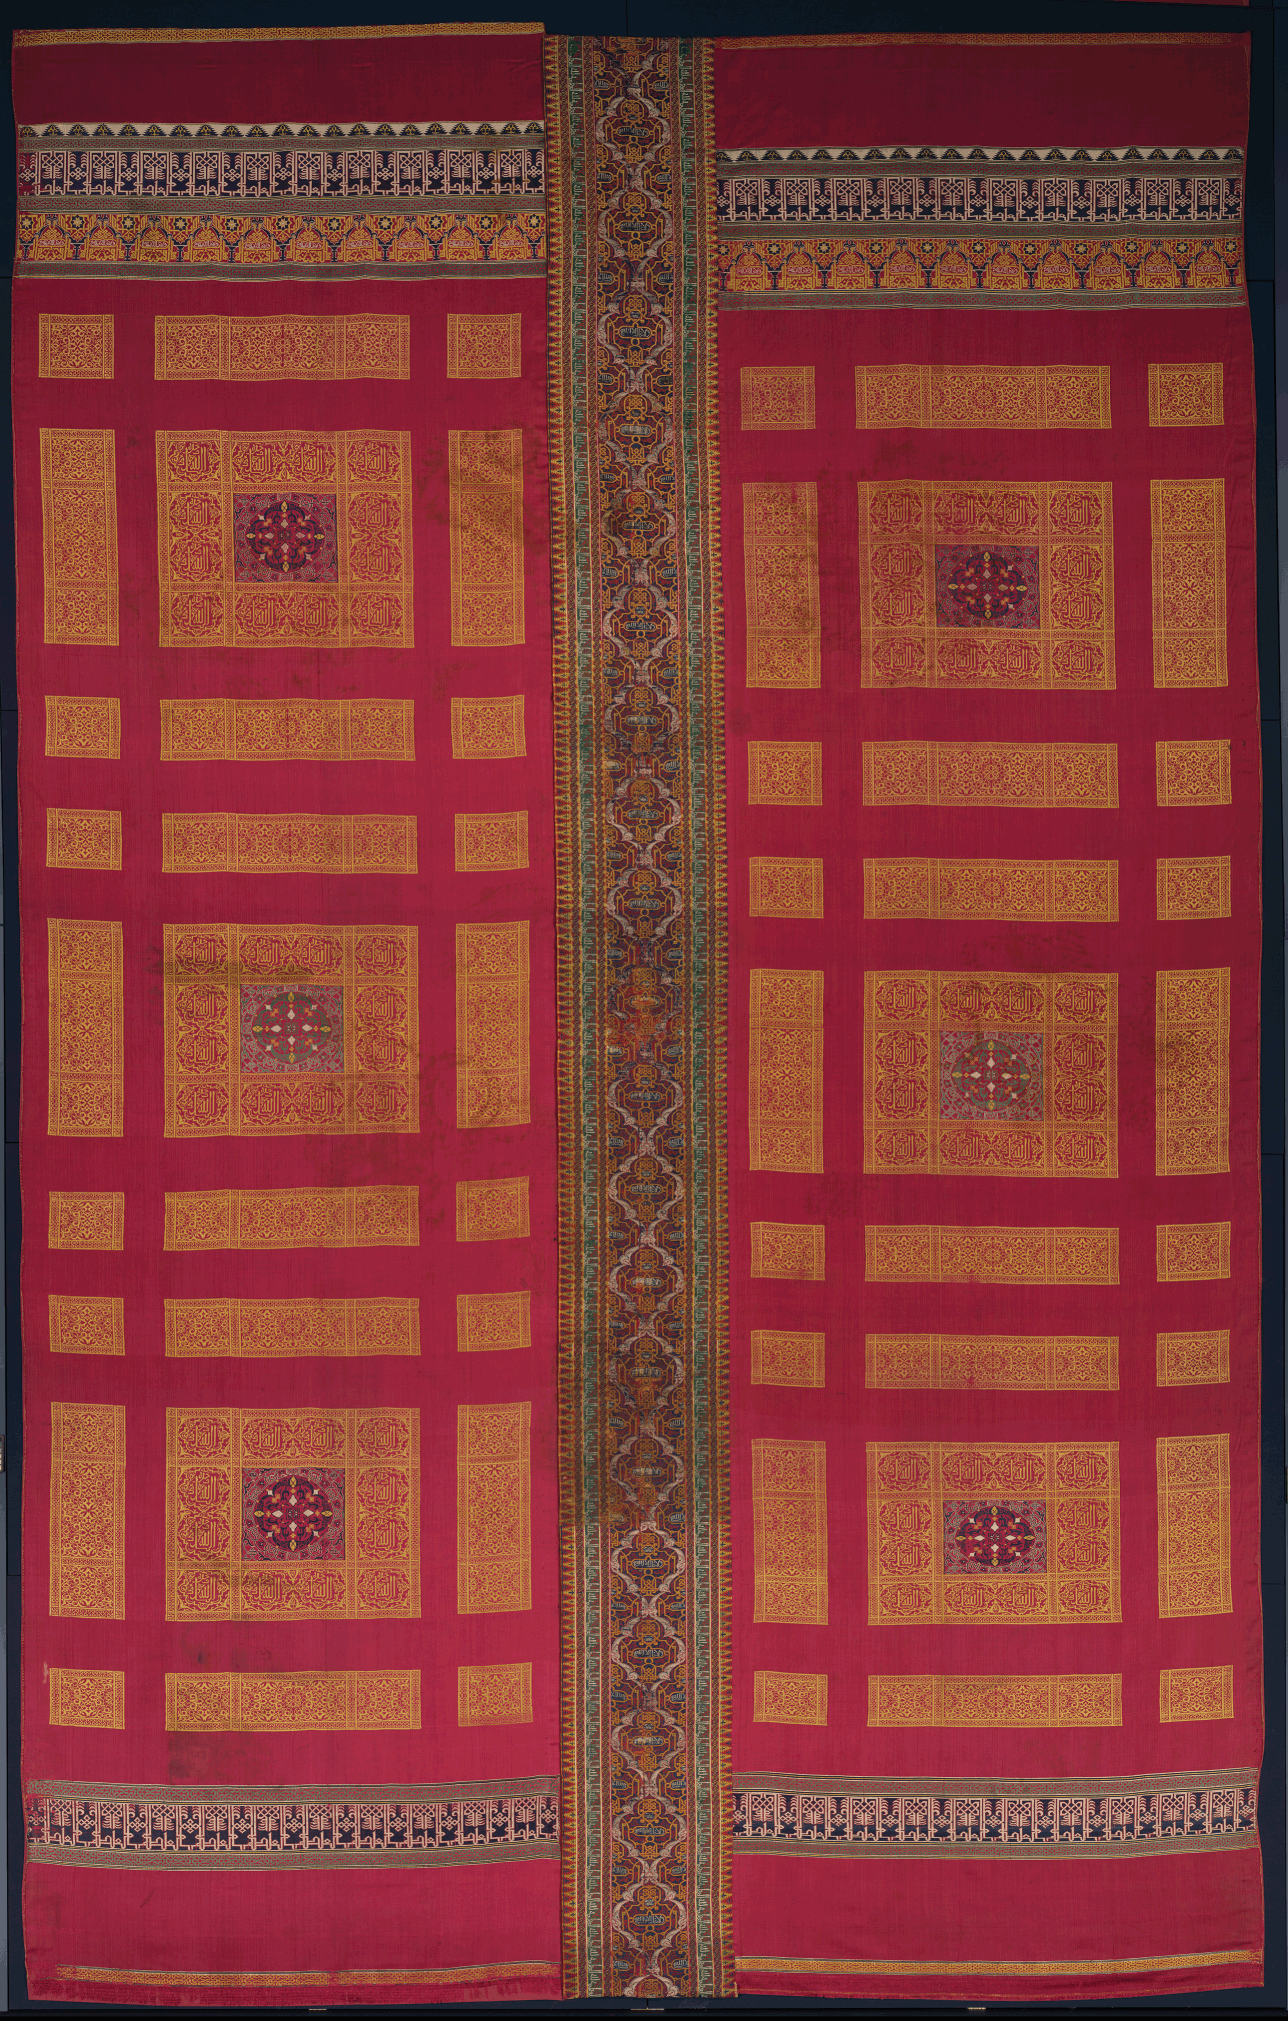 Prince's trousers and lining, 700s. China, Tang dynasty. Twill damask:  silk; overall: 52 x 28 cm (20 1/2 x 11 in.). This coat and pants are part  of a set of garments